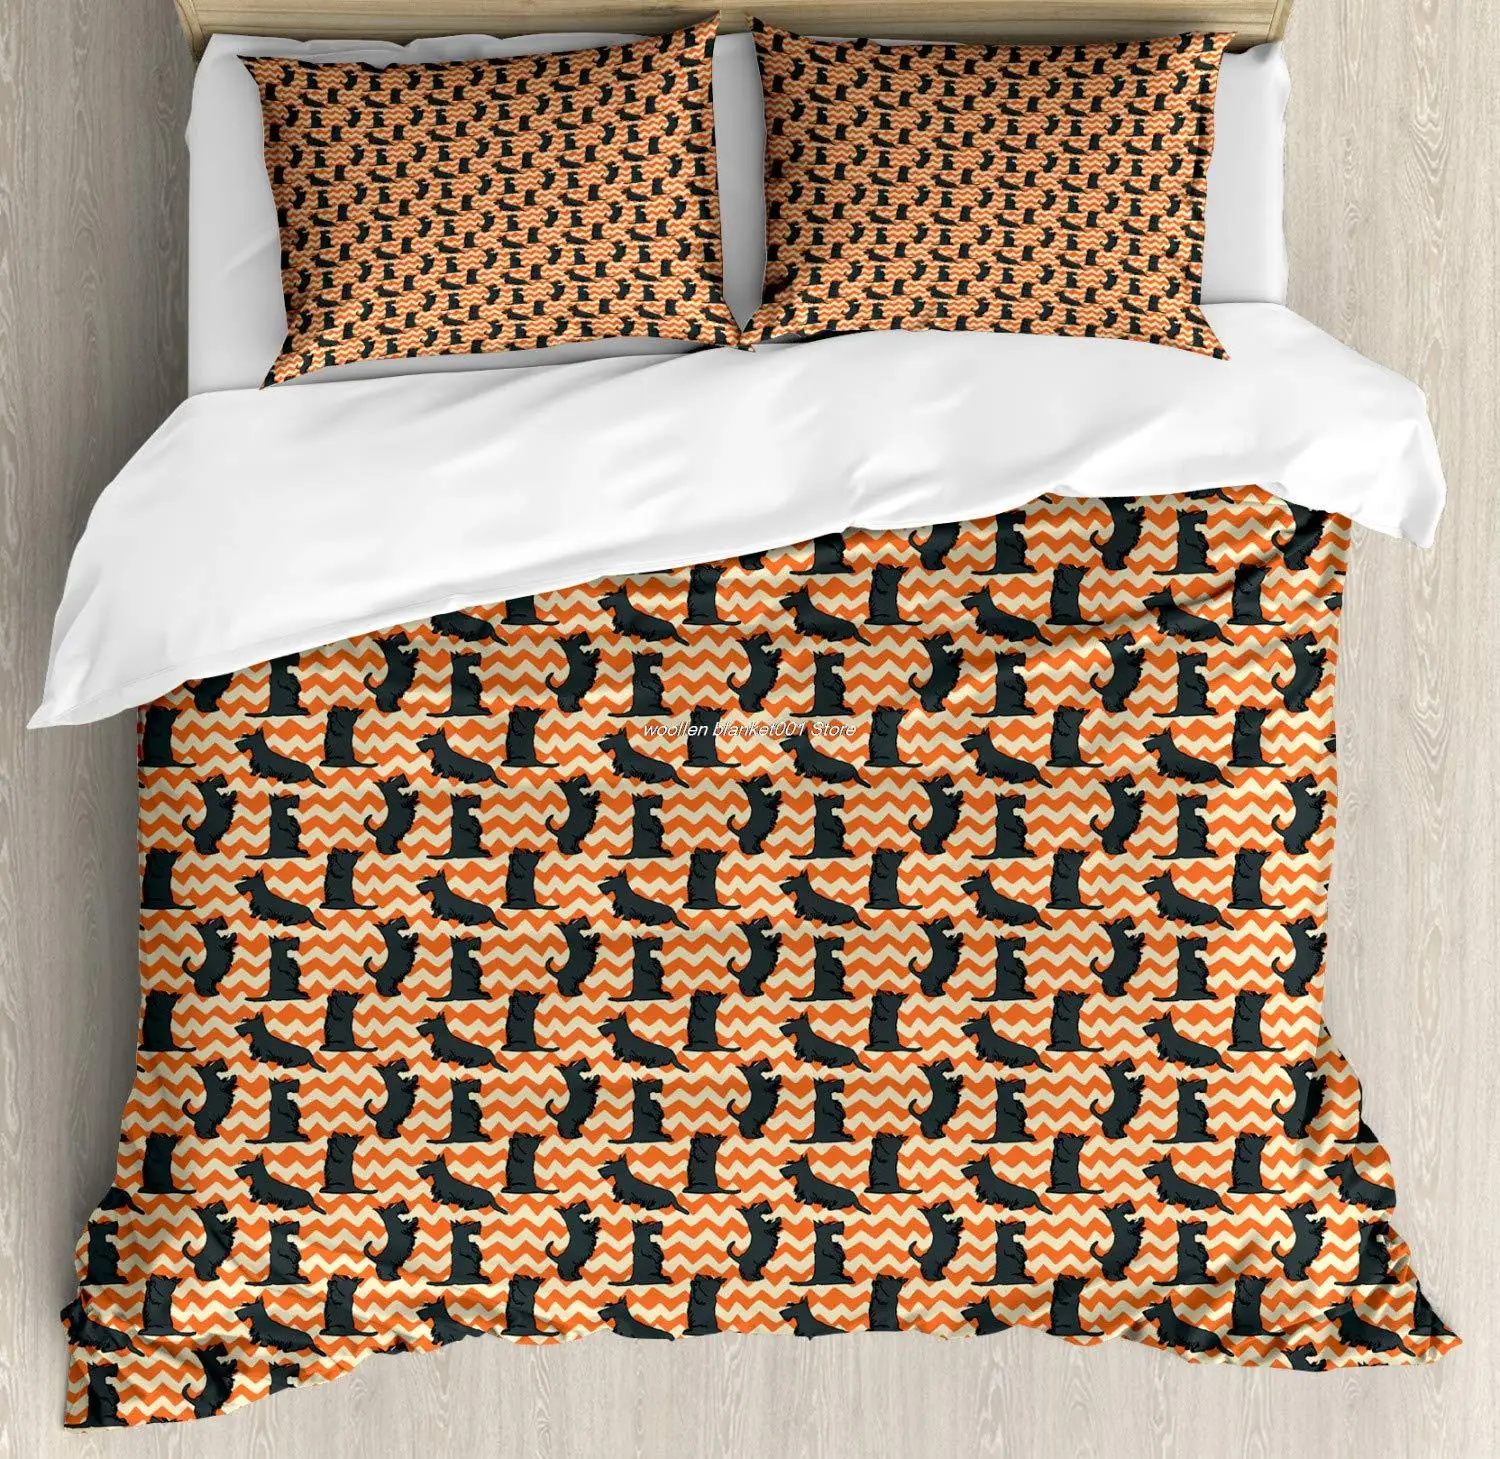 

Scottie Dog Duvet Cover Set Sketched Puppies on a Crooked Chevron Zigzag Backdrop Decorative 3 Piece Bedding Set with 2 Pillow